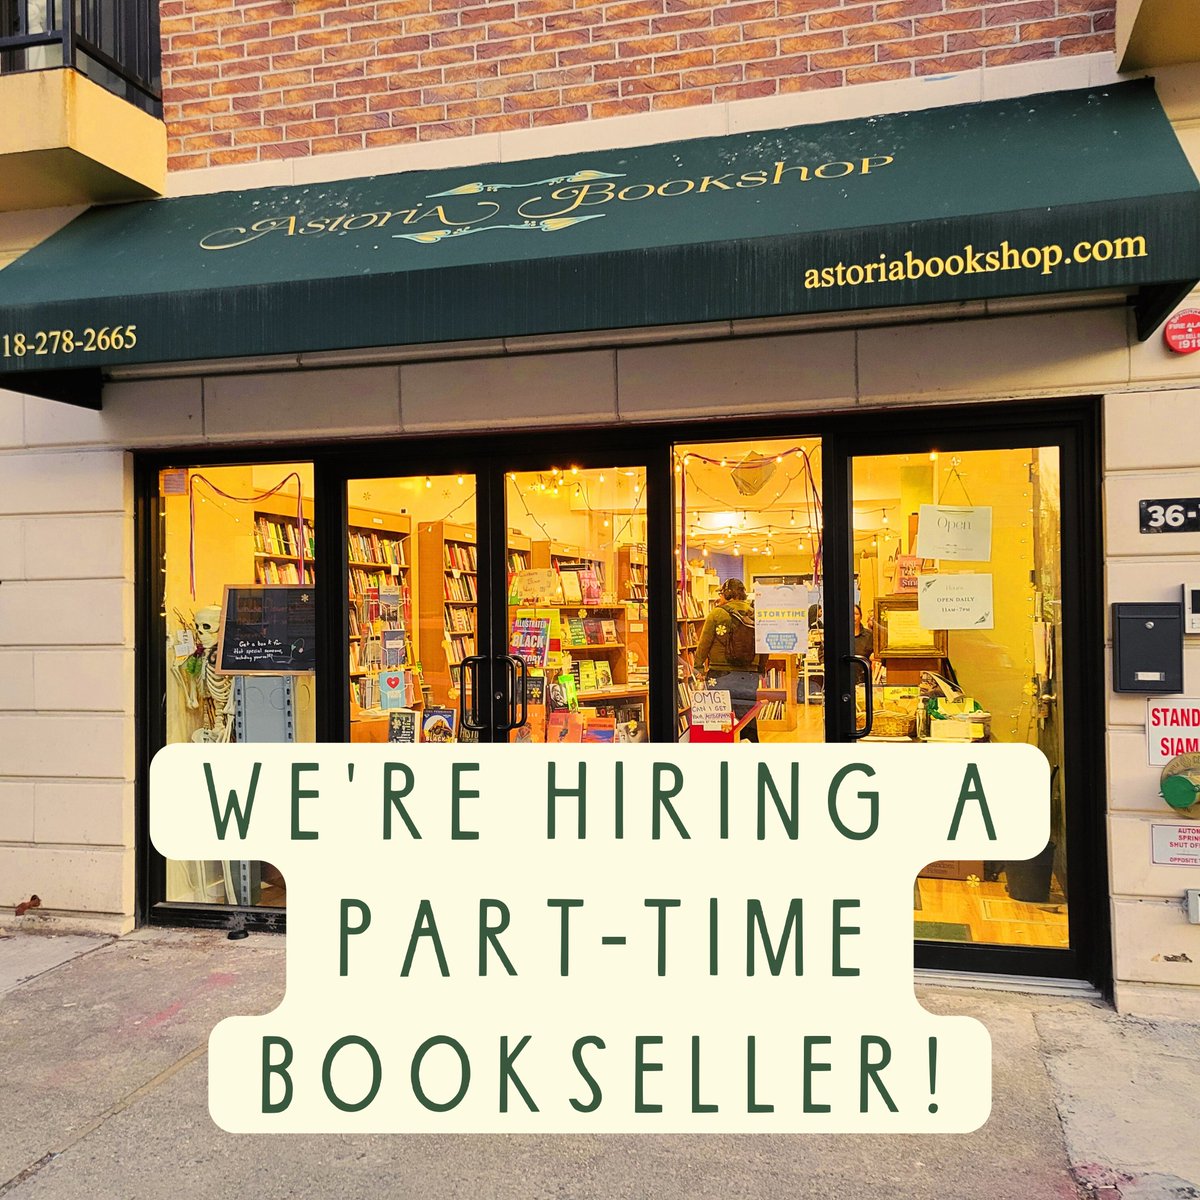 We're hiring a part-time bookseller! Details & application instructions on our website: astoriabookshop.com/careers